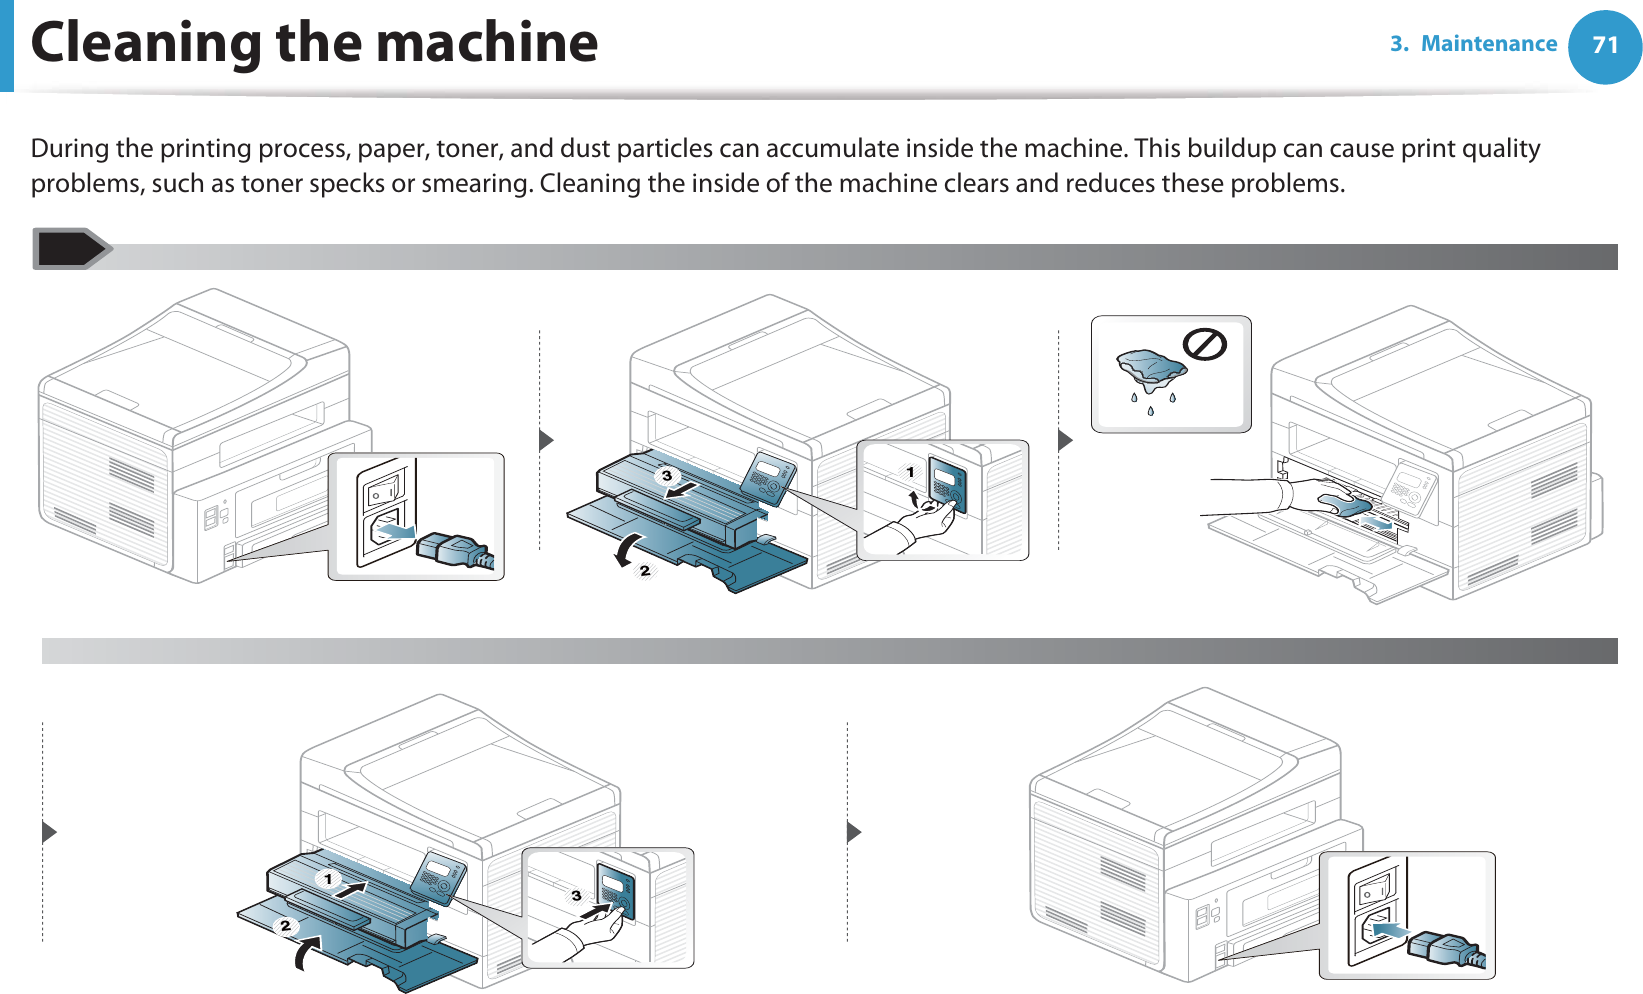 Cleaning the machine 713. MaintenanceDuring the printing process, paper, toner, and dust particles can accumulate inside the machine. This buildup can cause print quality problems, such as toner specks or smearing. Cleaning the inside of the machine clears and reduces these problems. 21 3 3 21